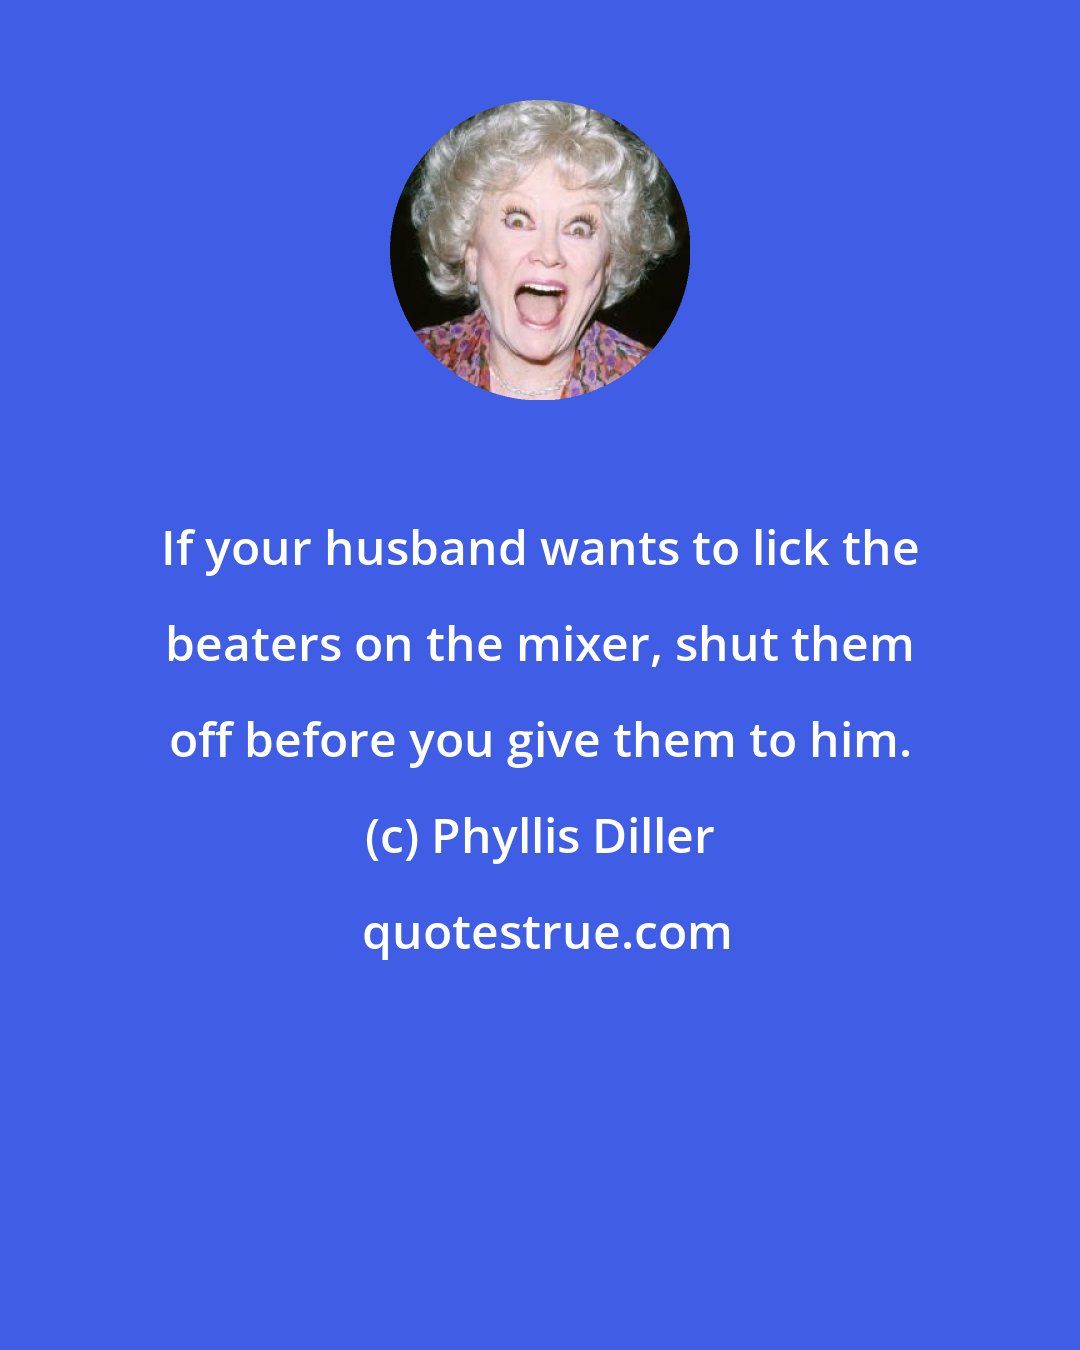 Phyllis Diller: If your husband wants to lick the beaters on the mixer, shut them off before you give them to him.